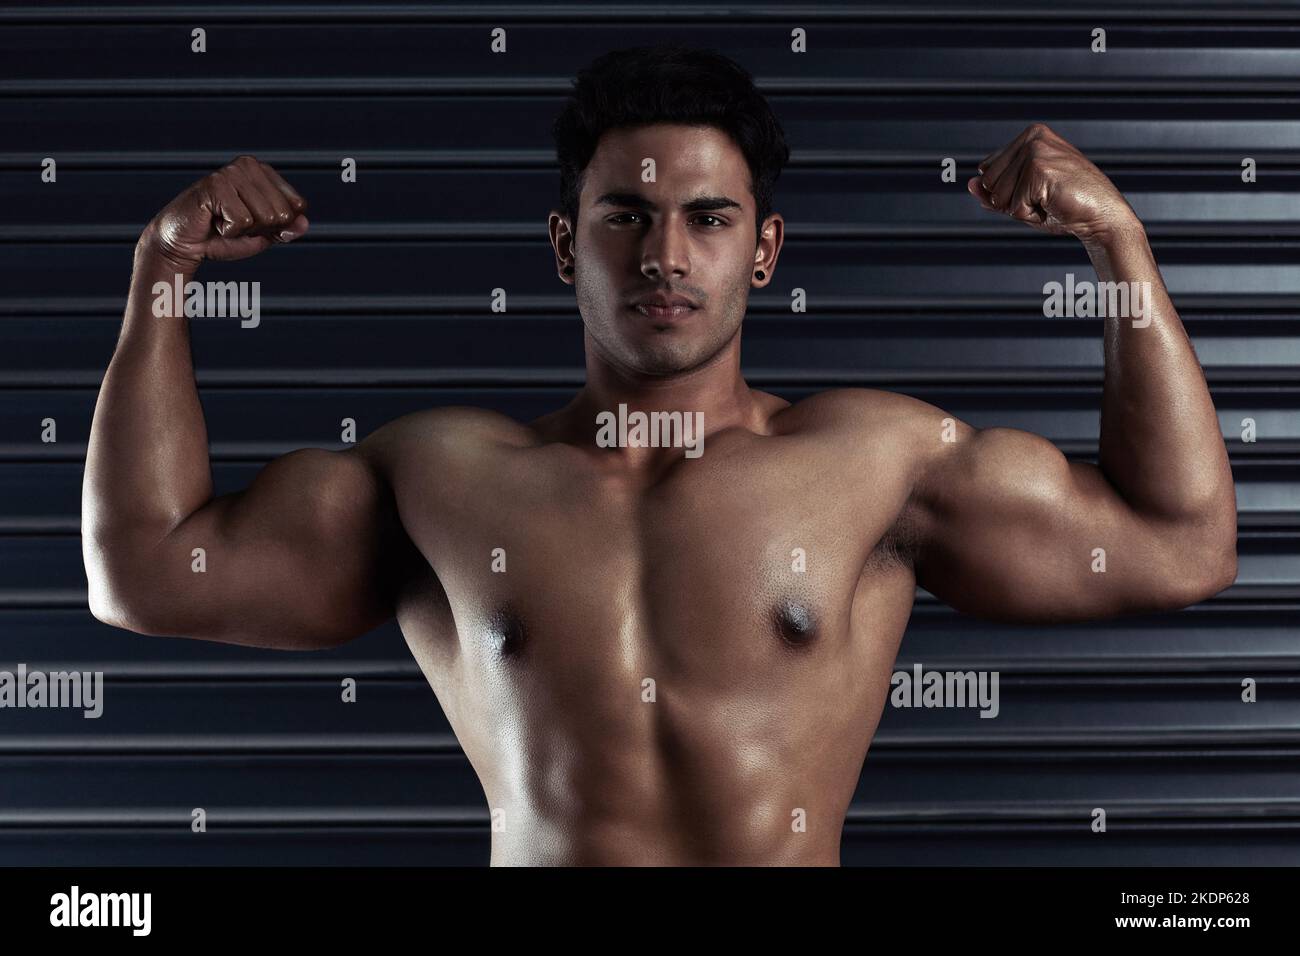 Check these guns. Cropped portrait of an athletic young man flexing his biceps against a dark background. Stock Photo